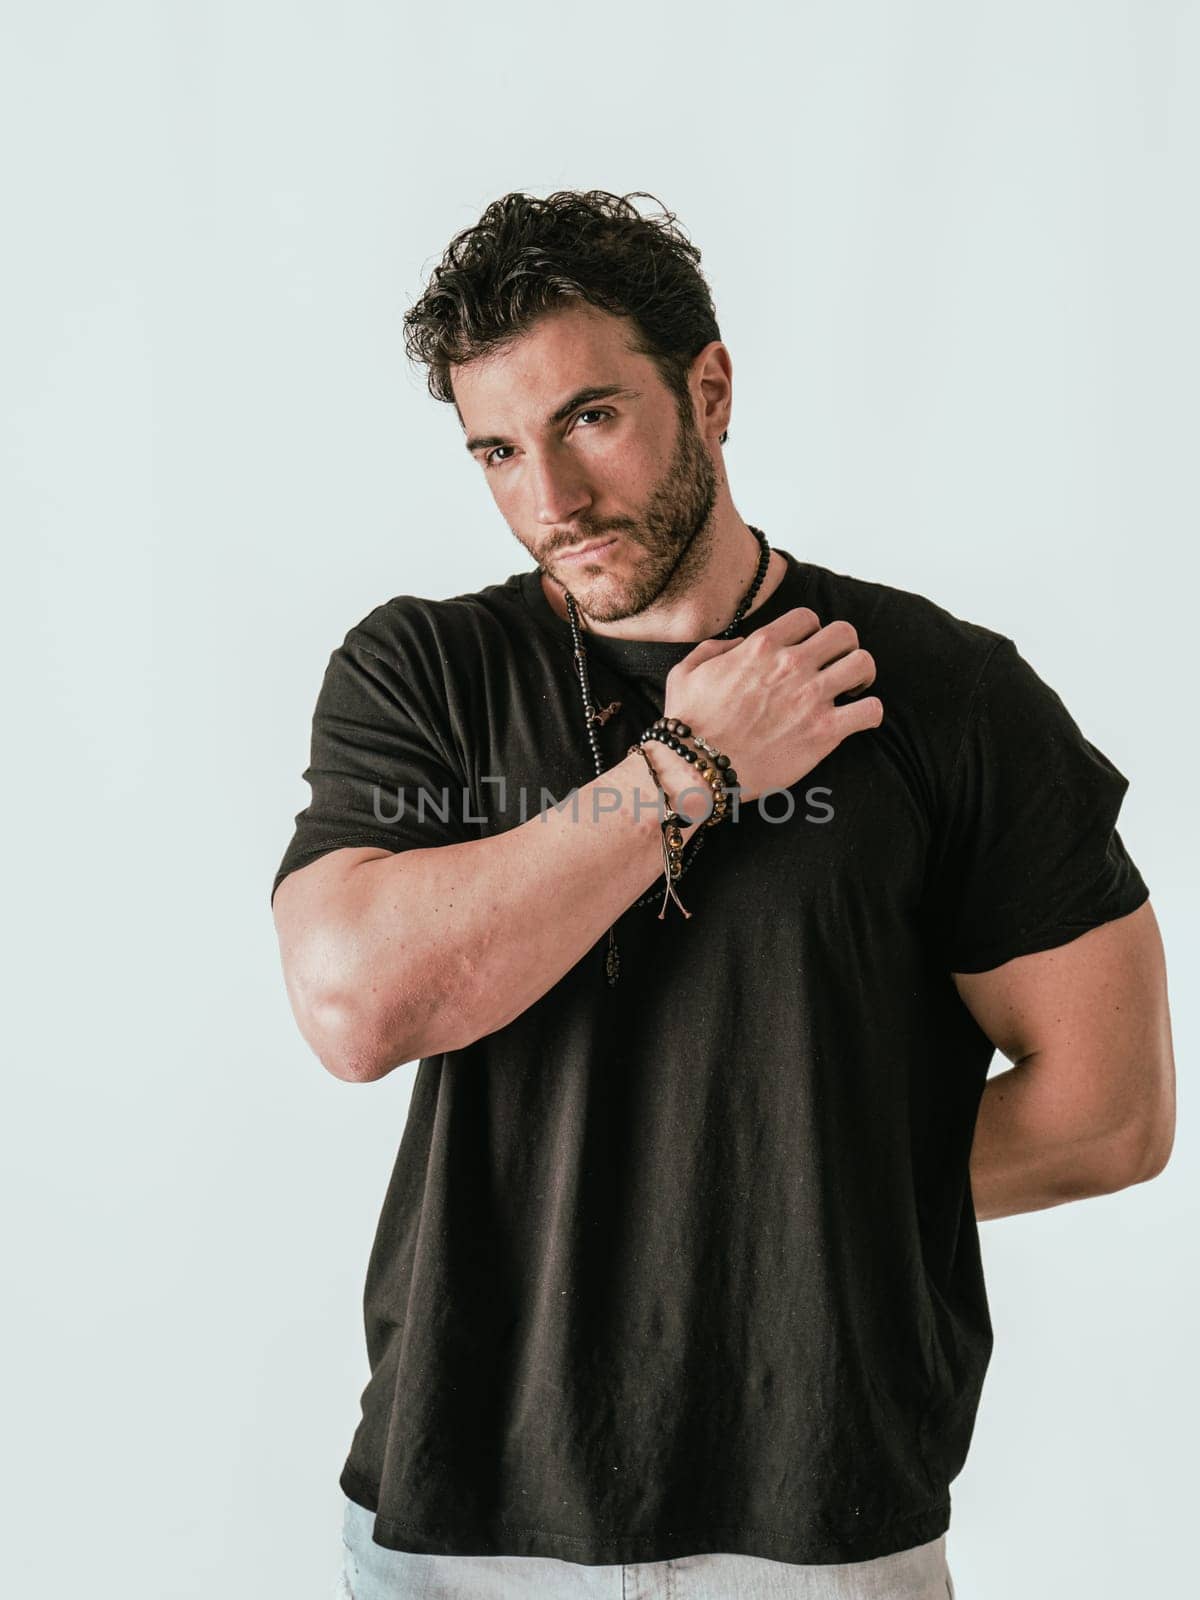 A Stylish Man in a Black Shirt Striking a Pose for a Captivating Photograph by artofphoto